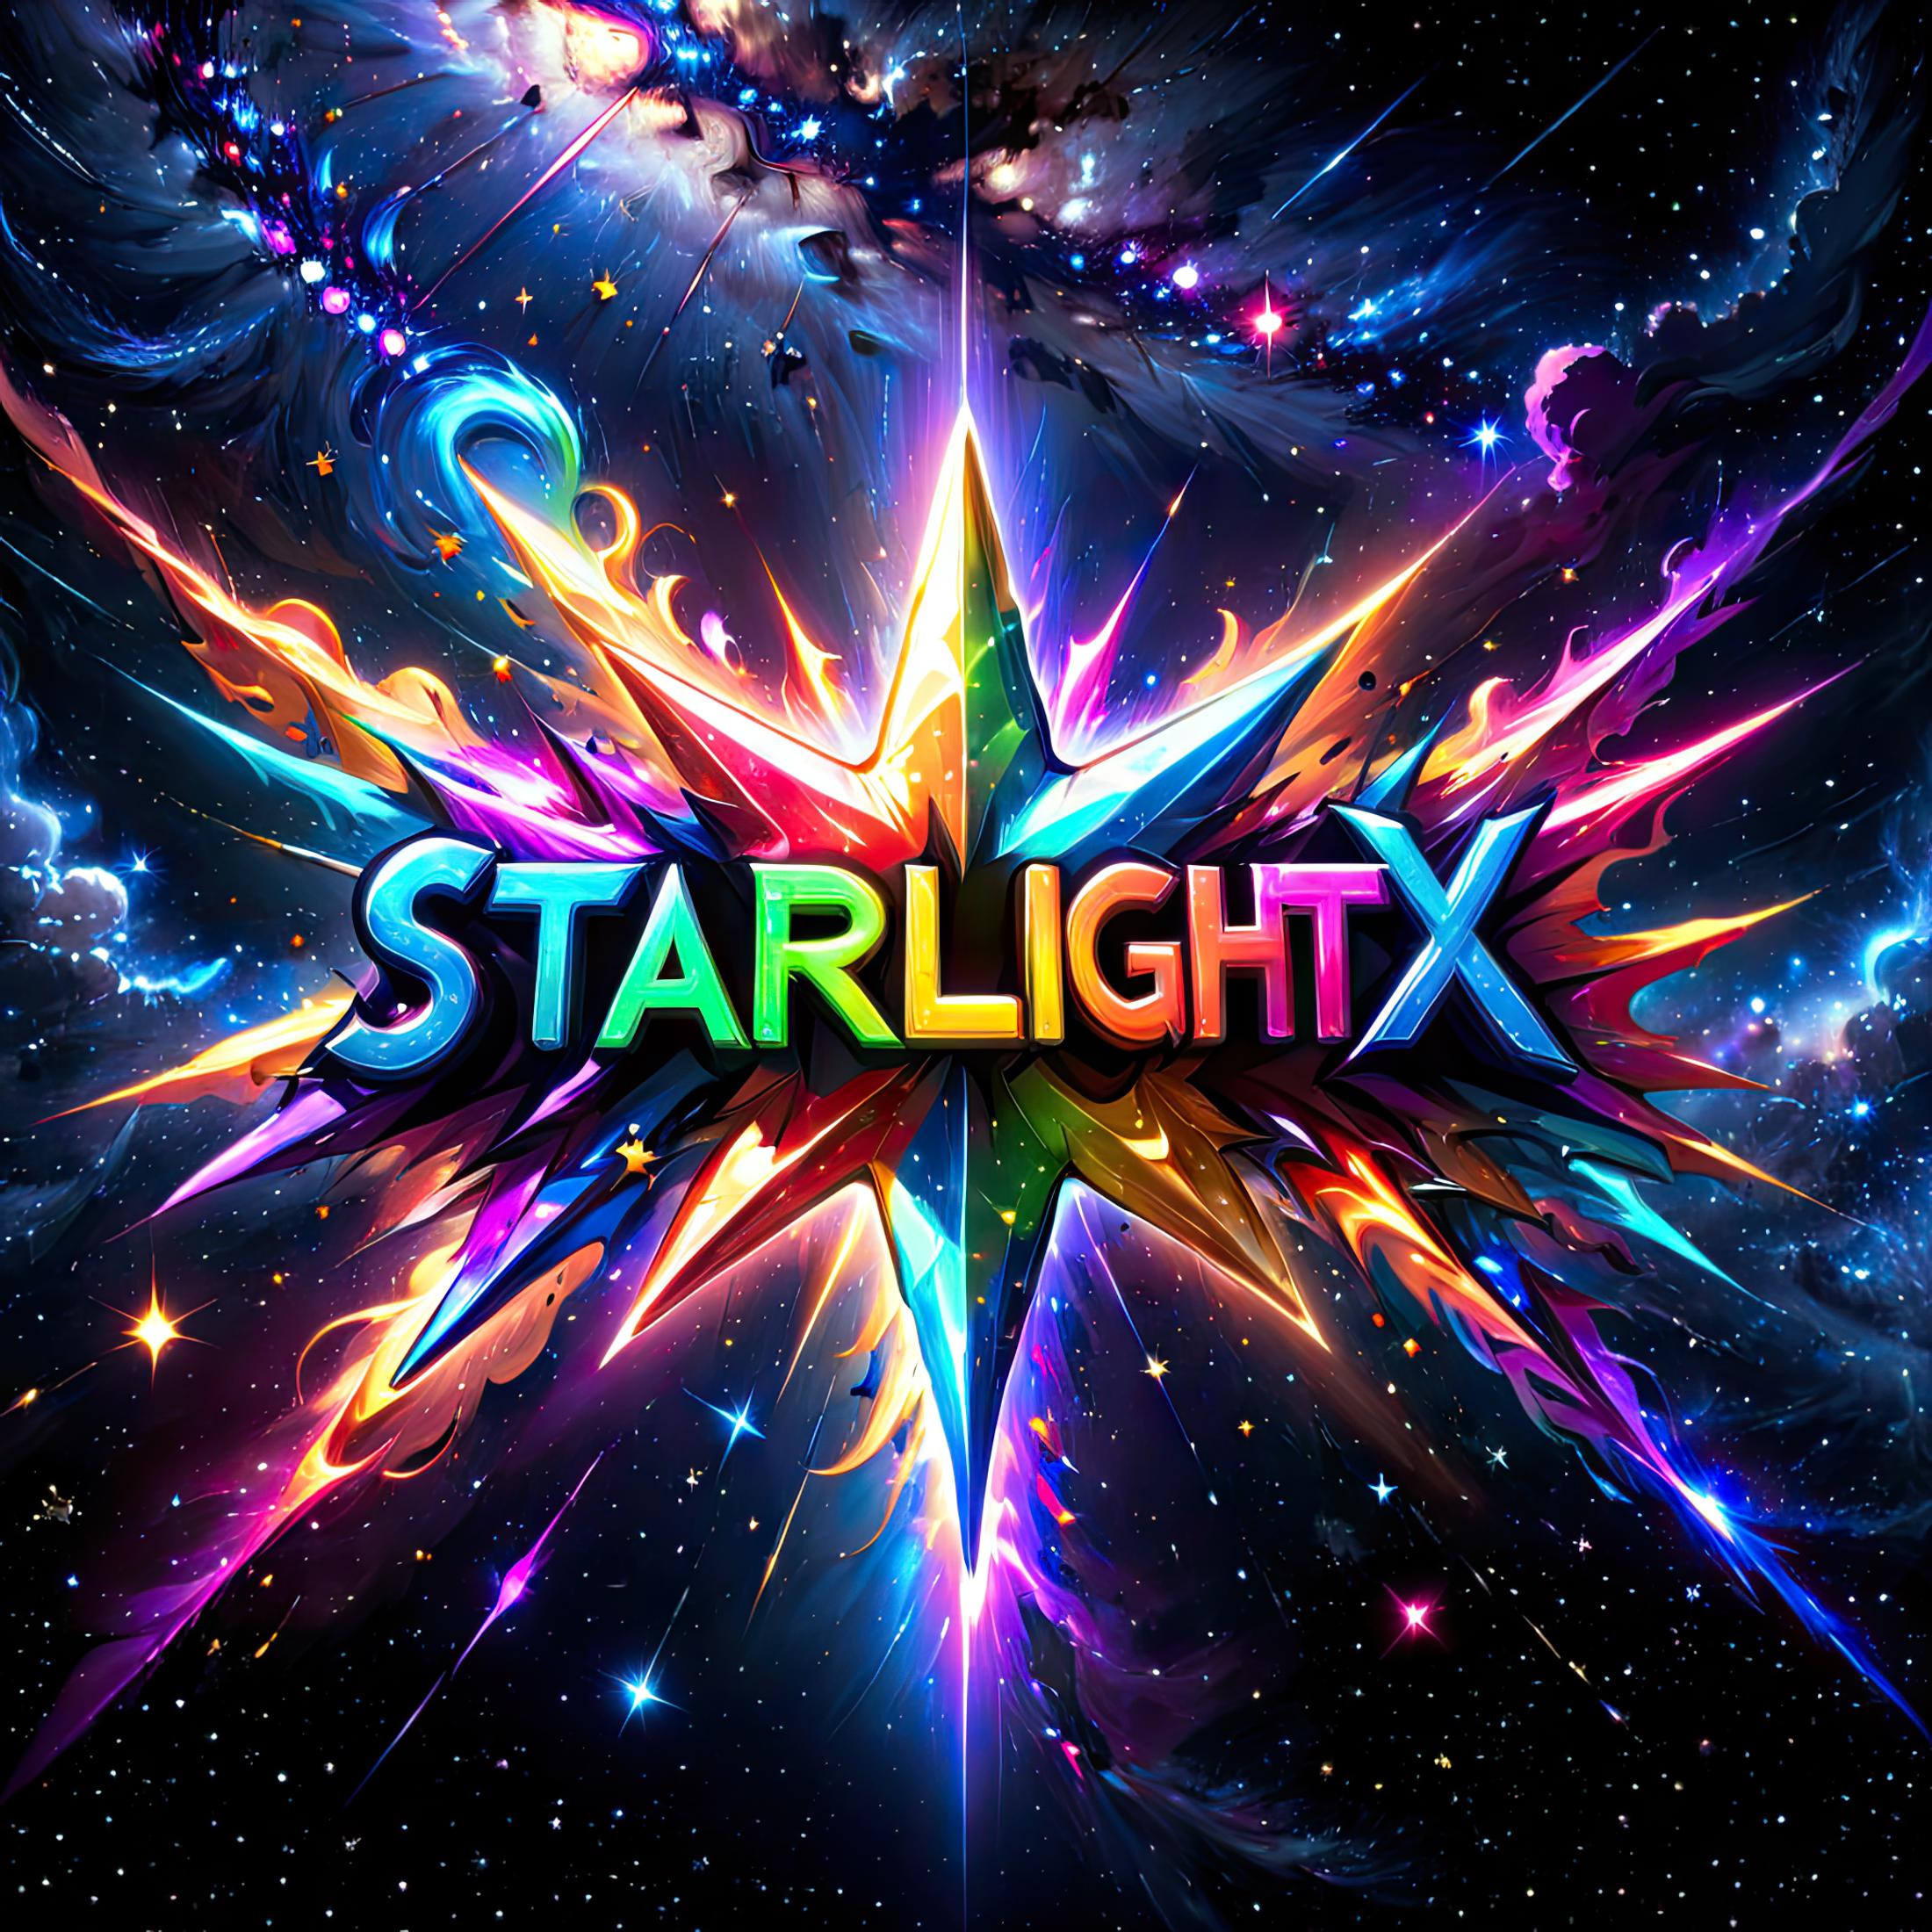 StarlightX - A Colorful and Luminous Starburst Wallpaper